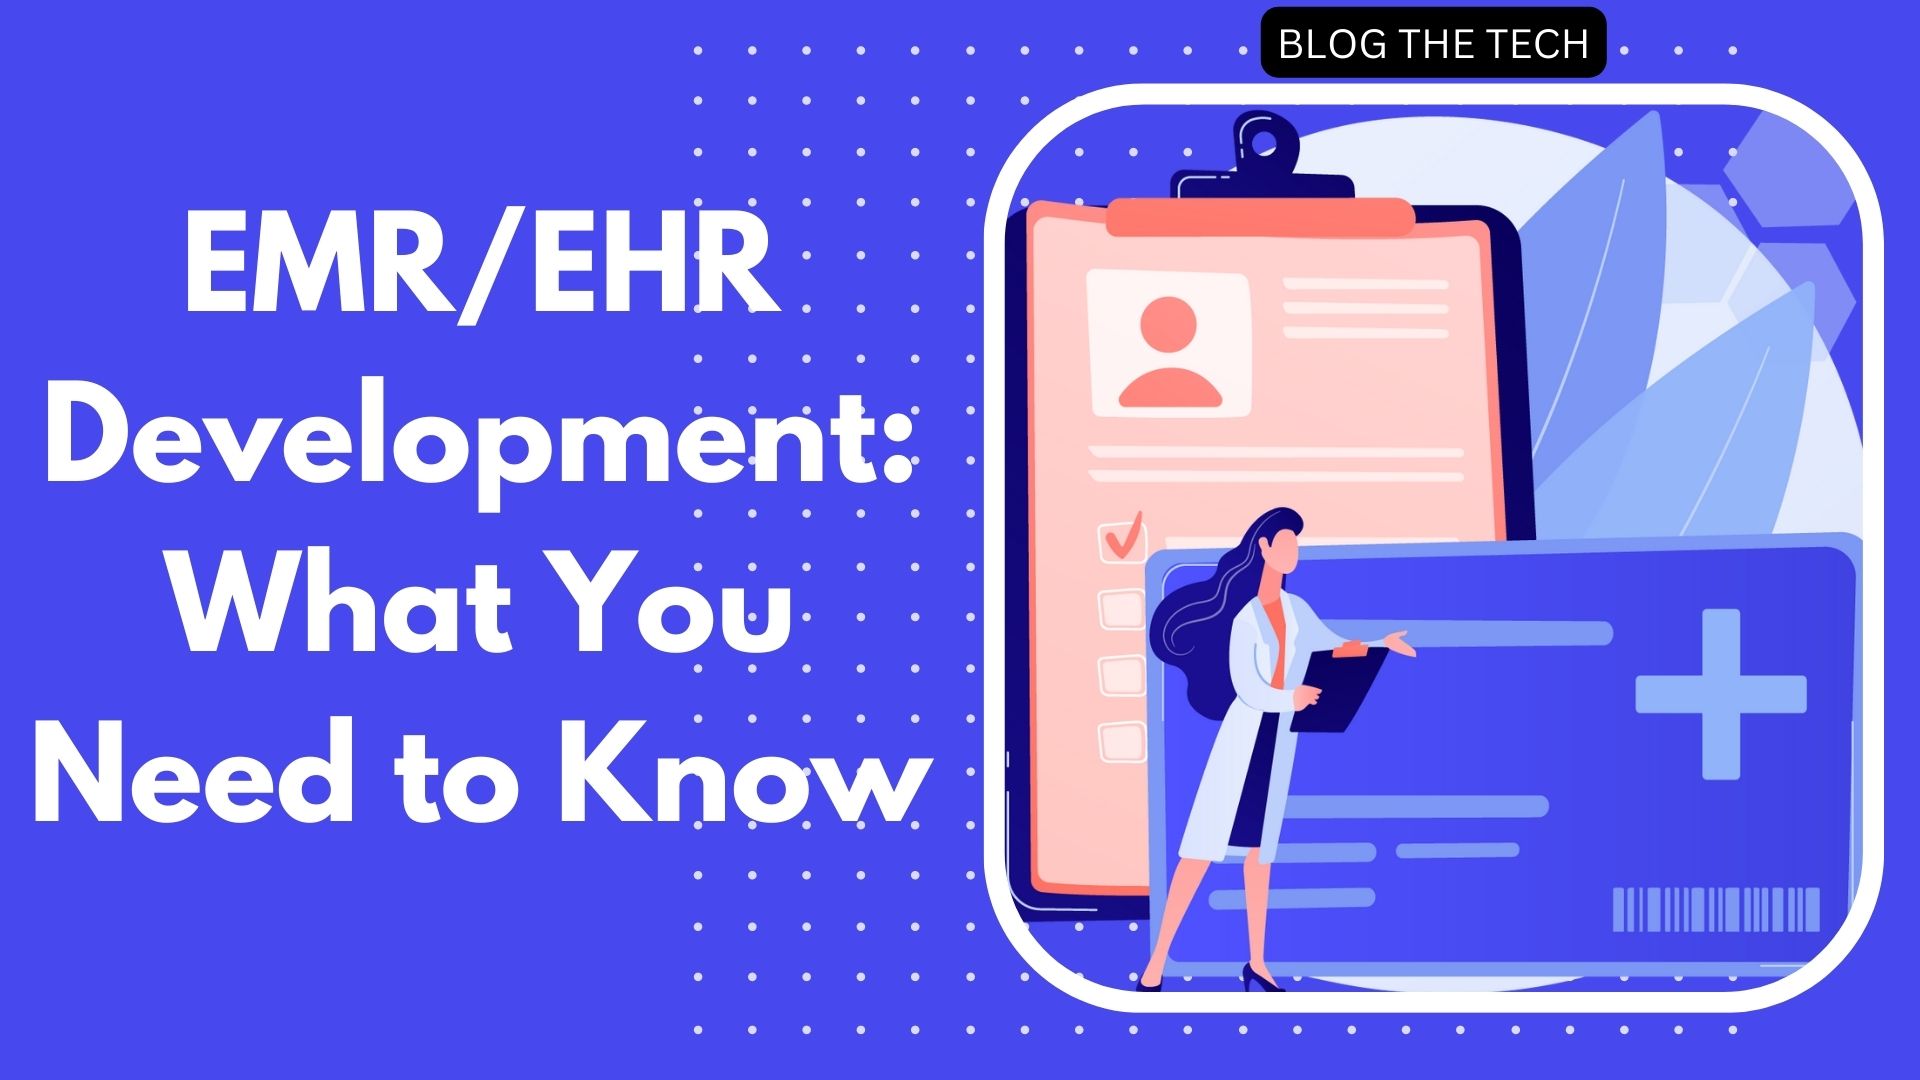 EMR/EHR Development: What You Need to Know